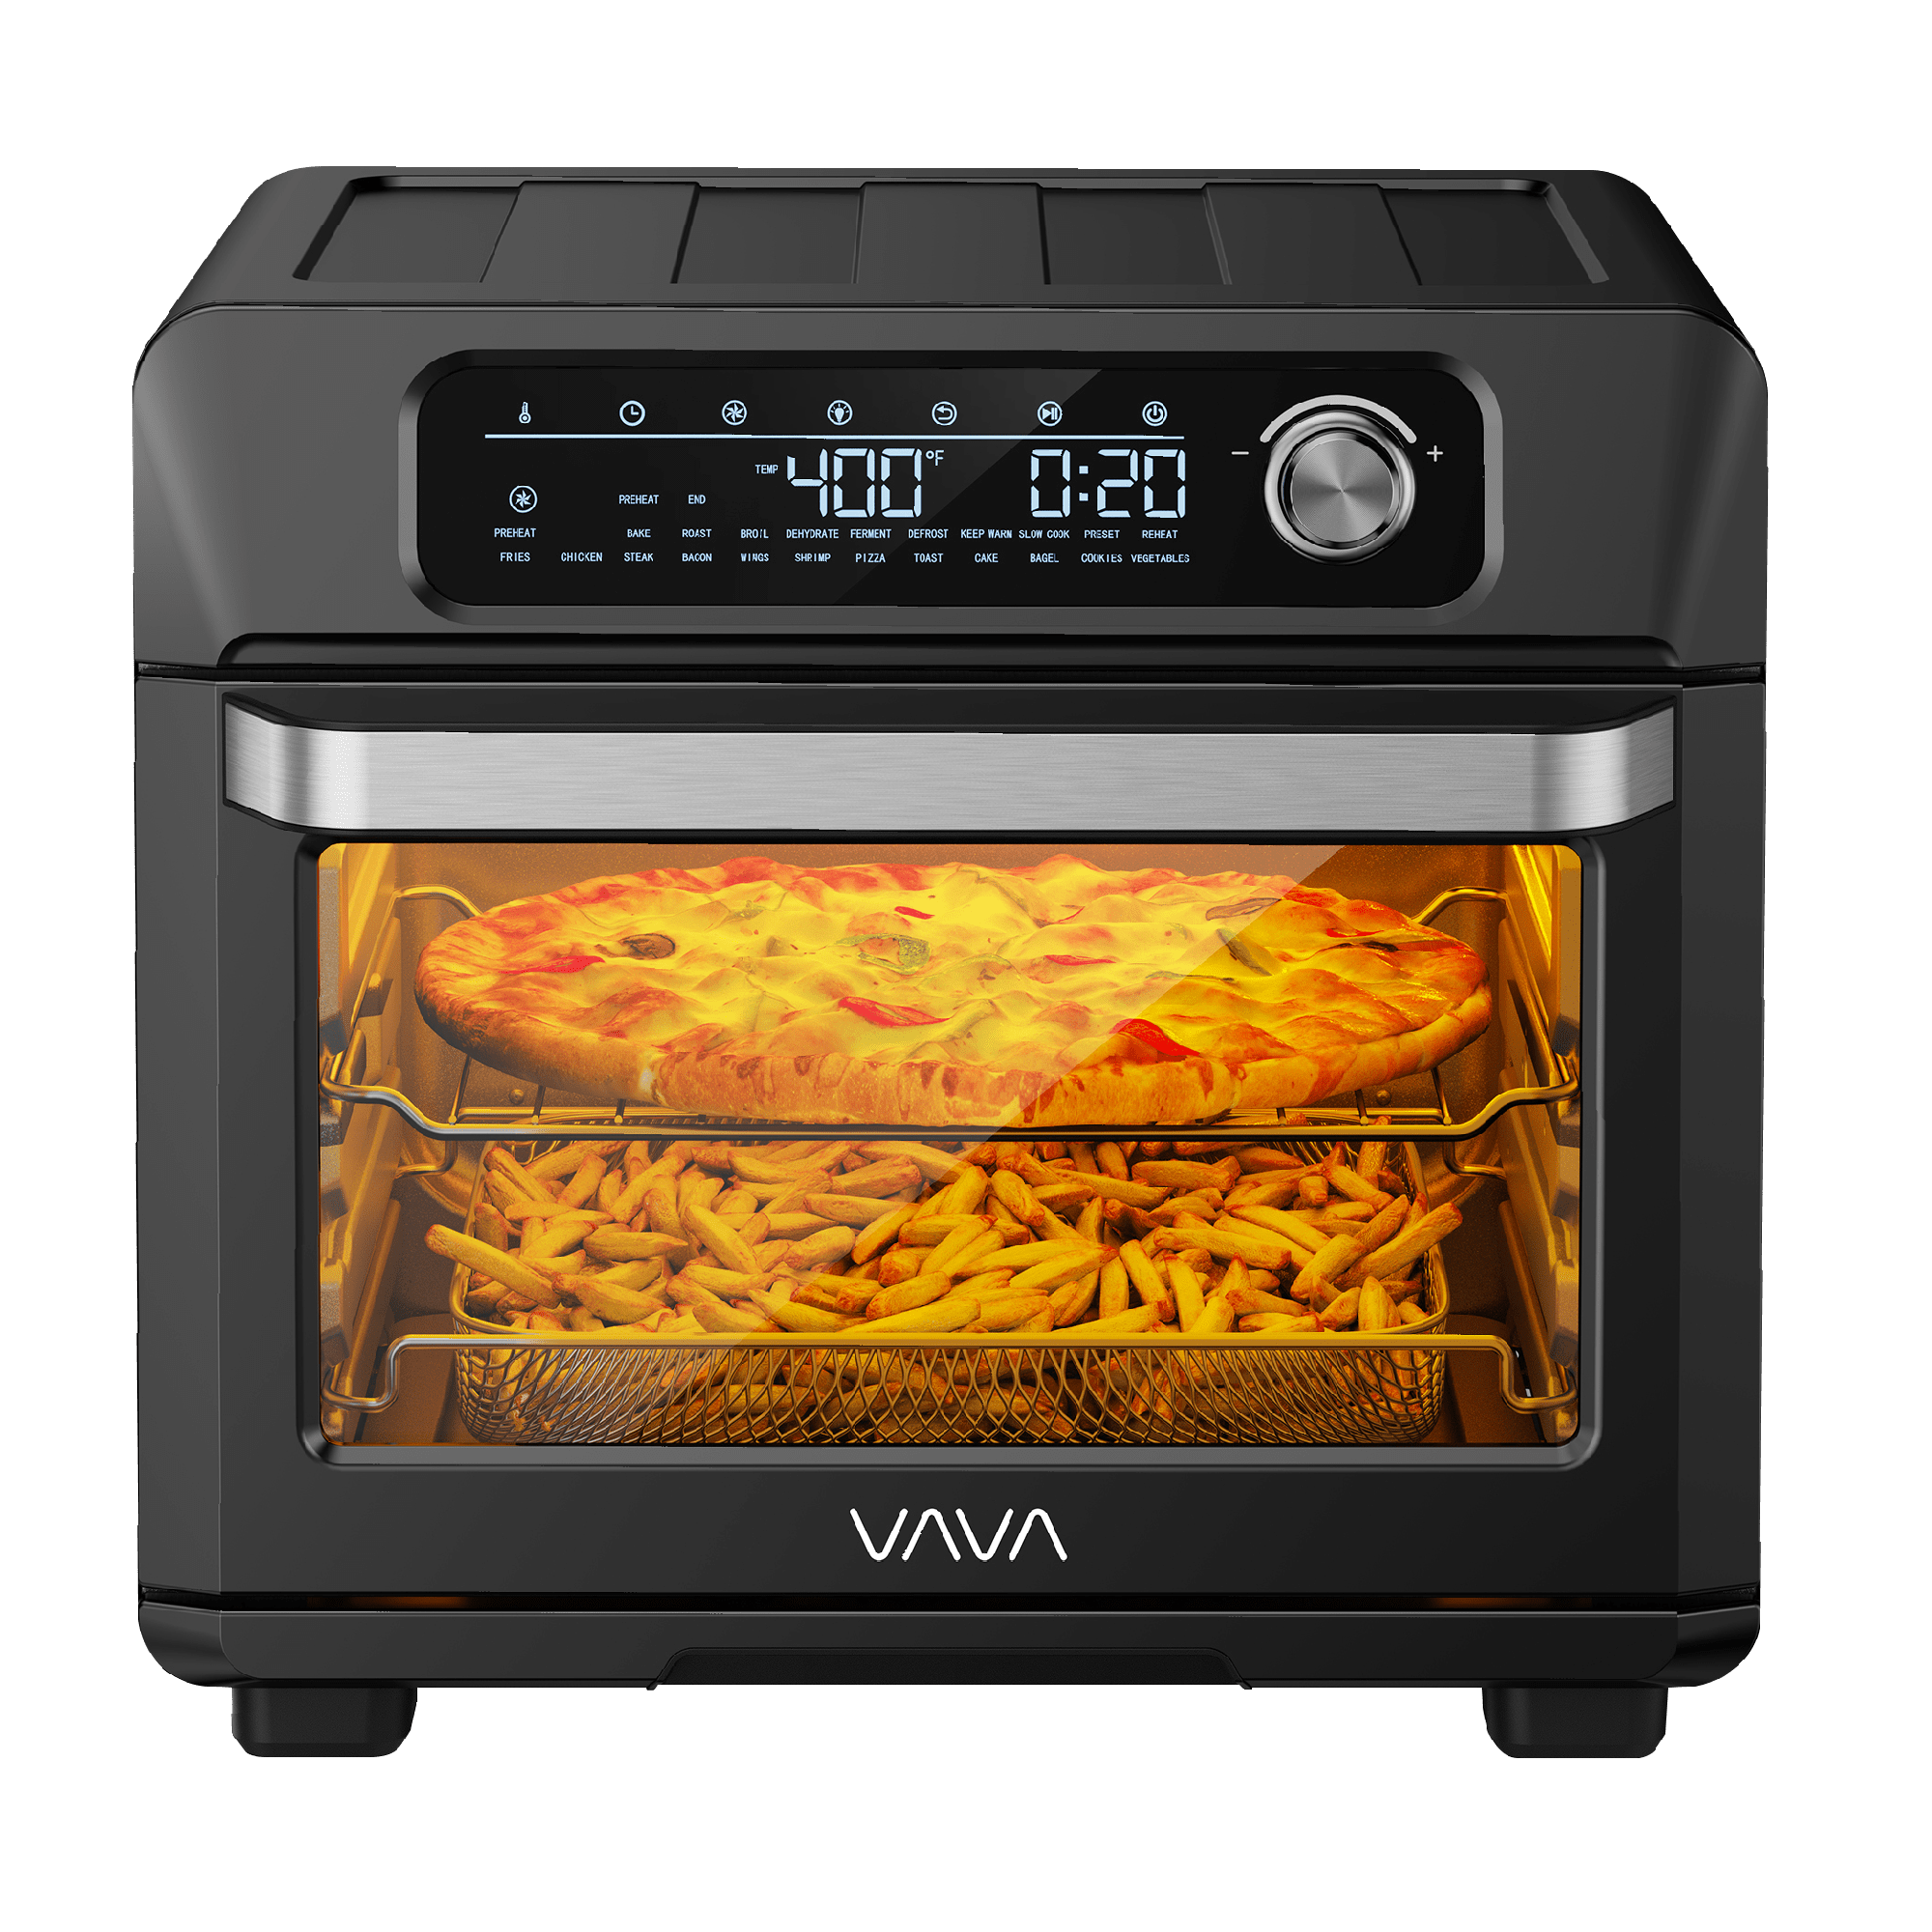 VAVA air fryer oven with a pizza and french fries cooking inside